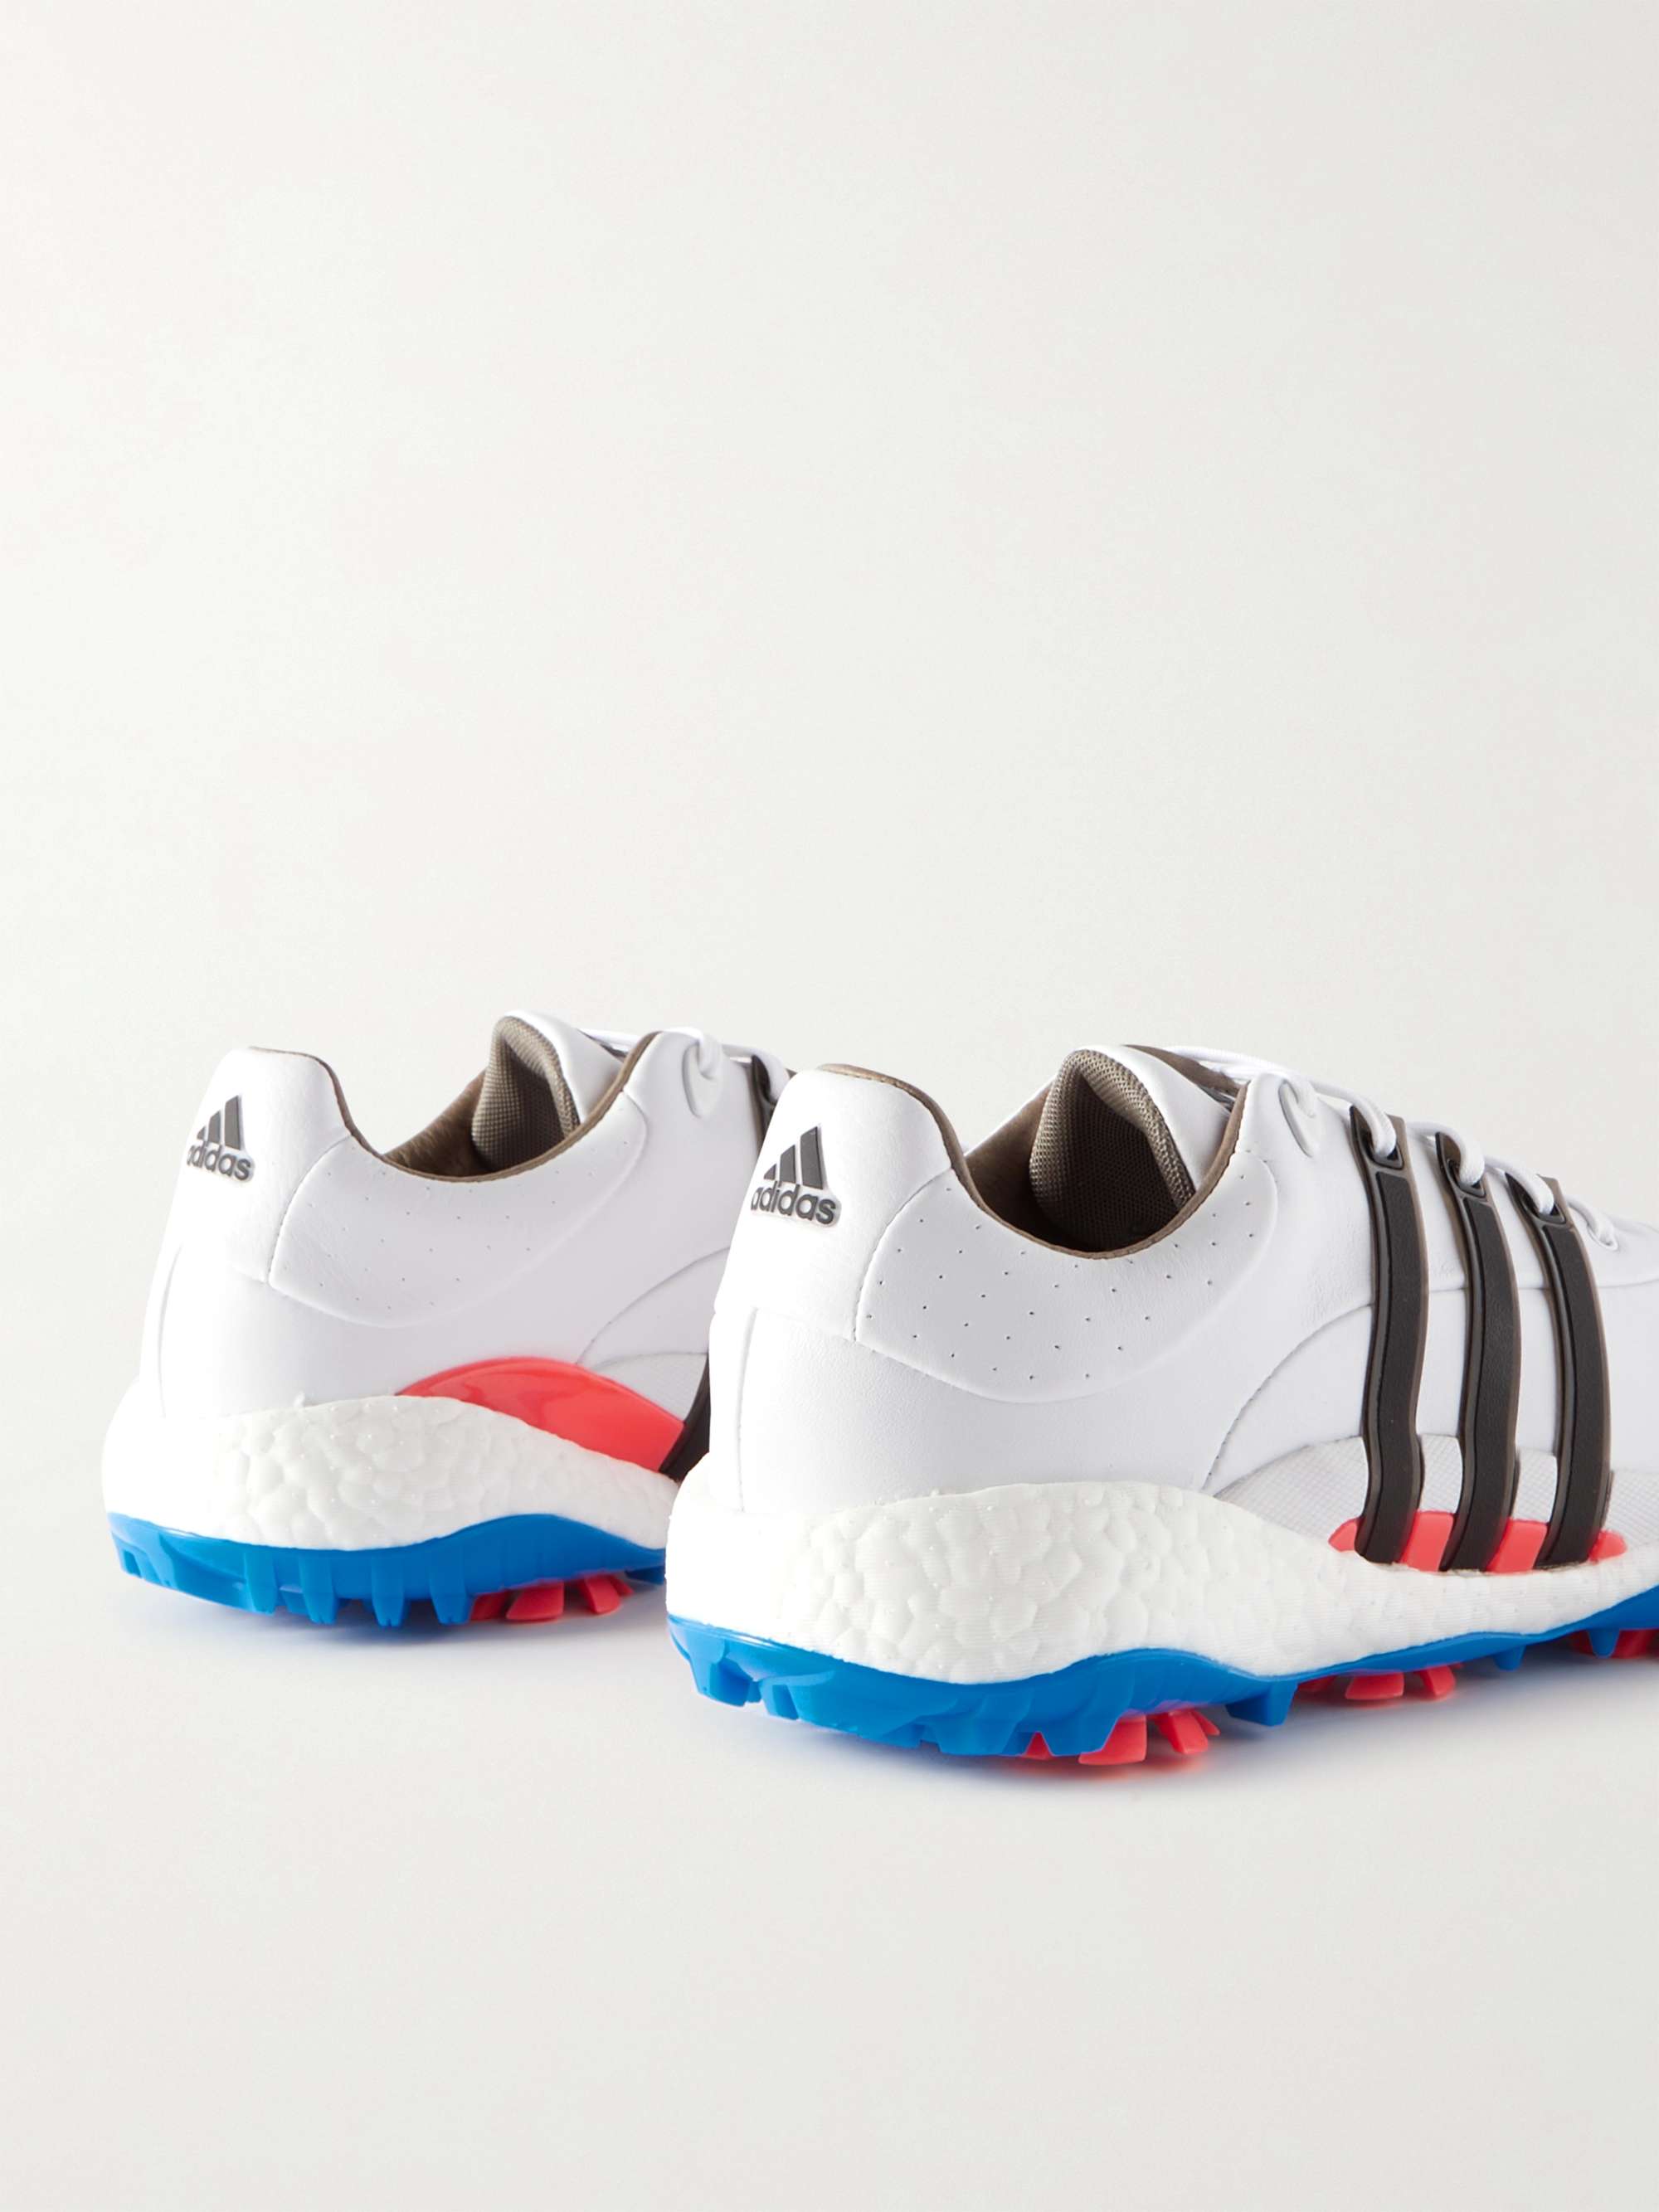 ADIDAS GOLF Tour360 Infinity Rubber-Trimmed Leather Golf Shoes